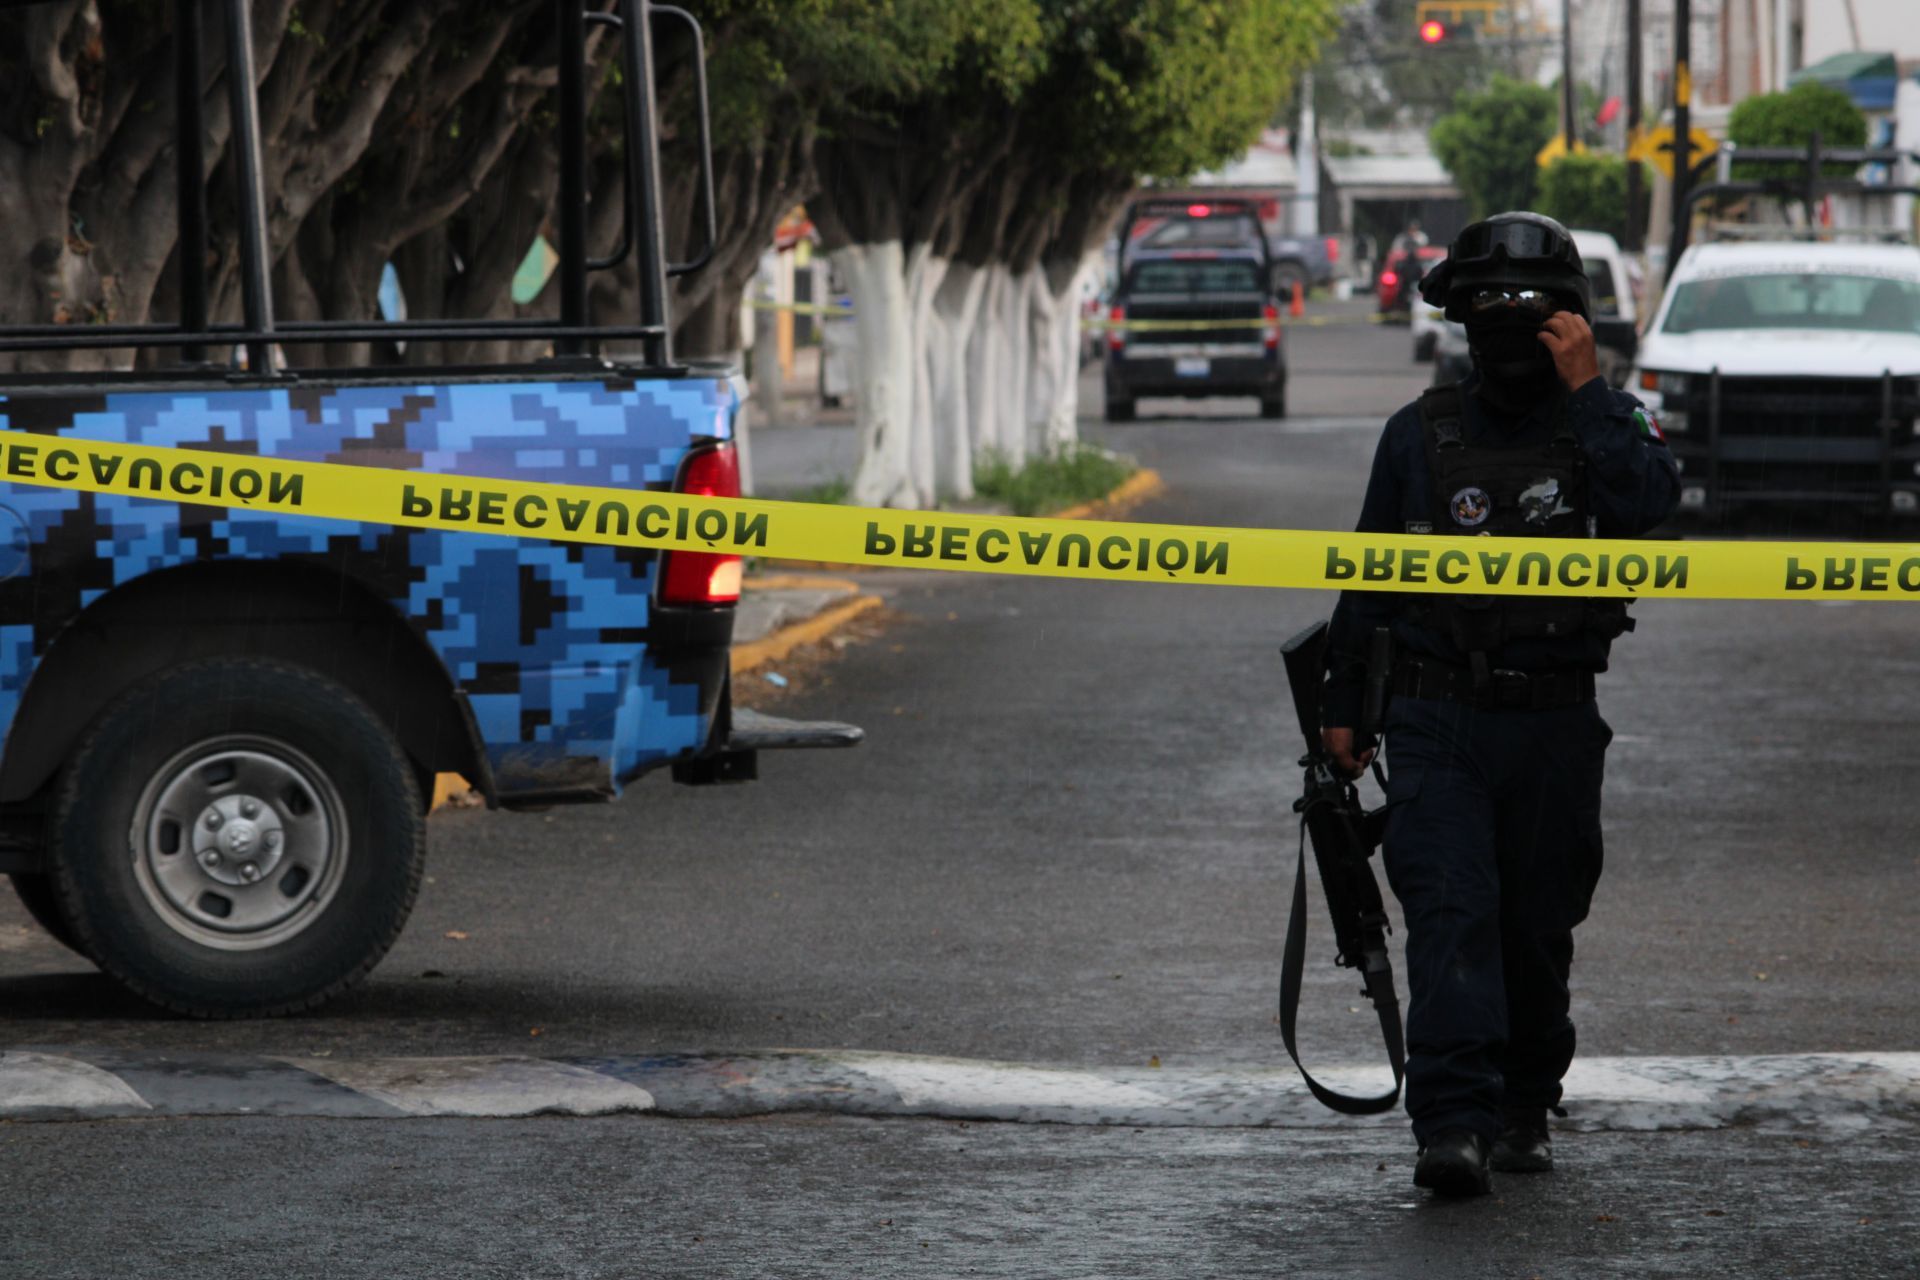 From September 1 to 18, 187 cases of premeditated homicide were registered in Guanajuato (Photo: Cuartoscuro)